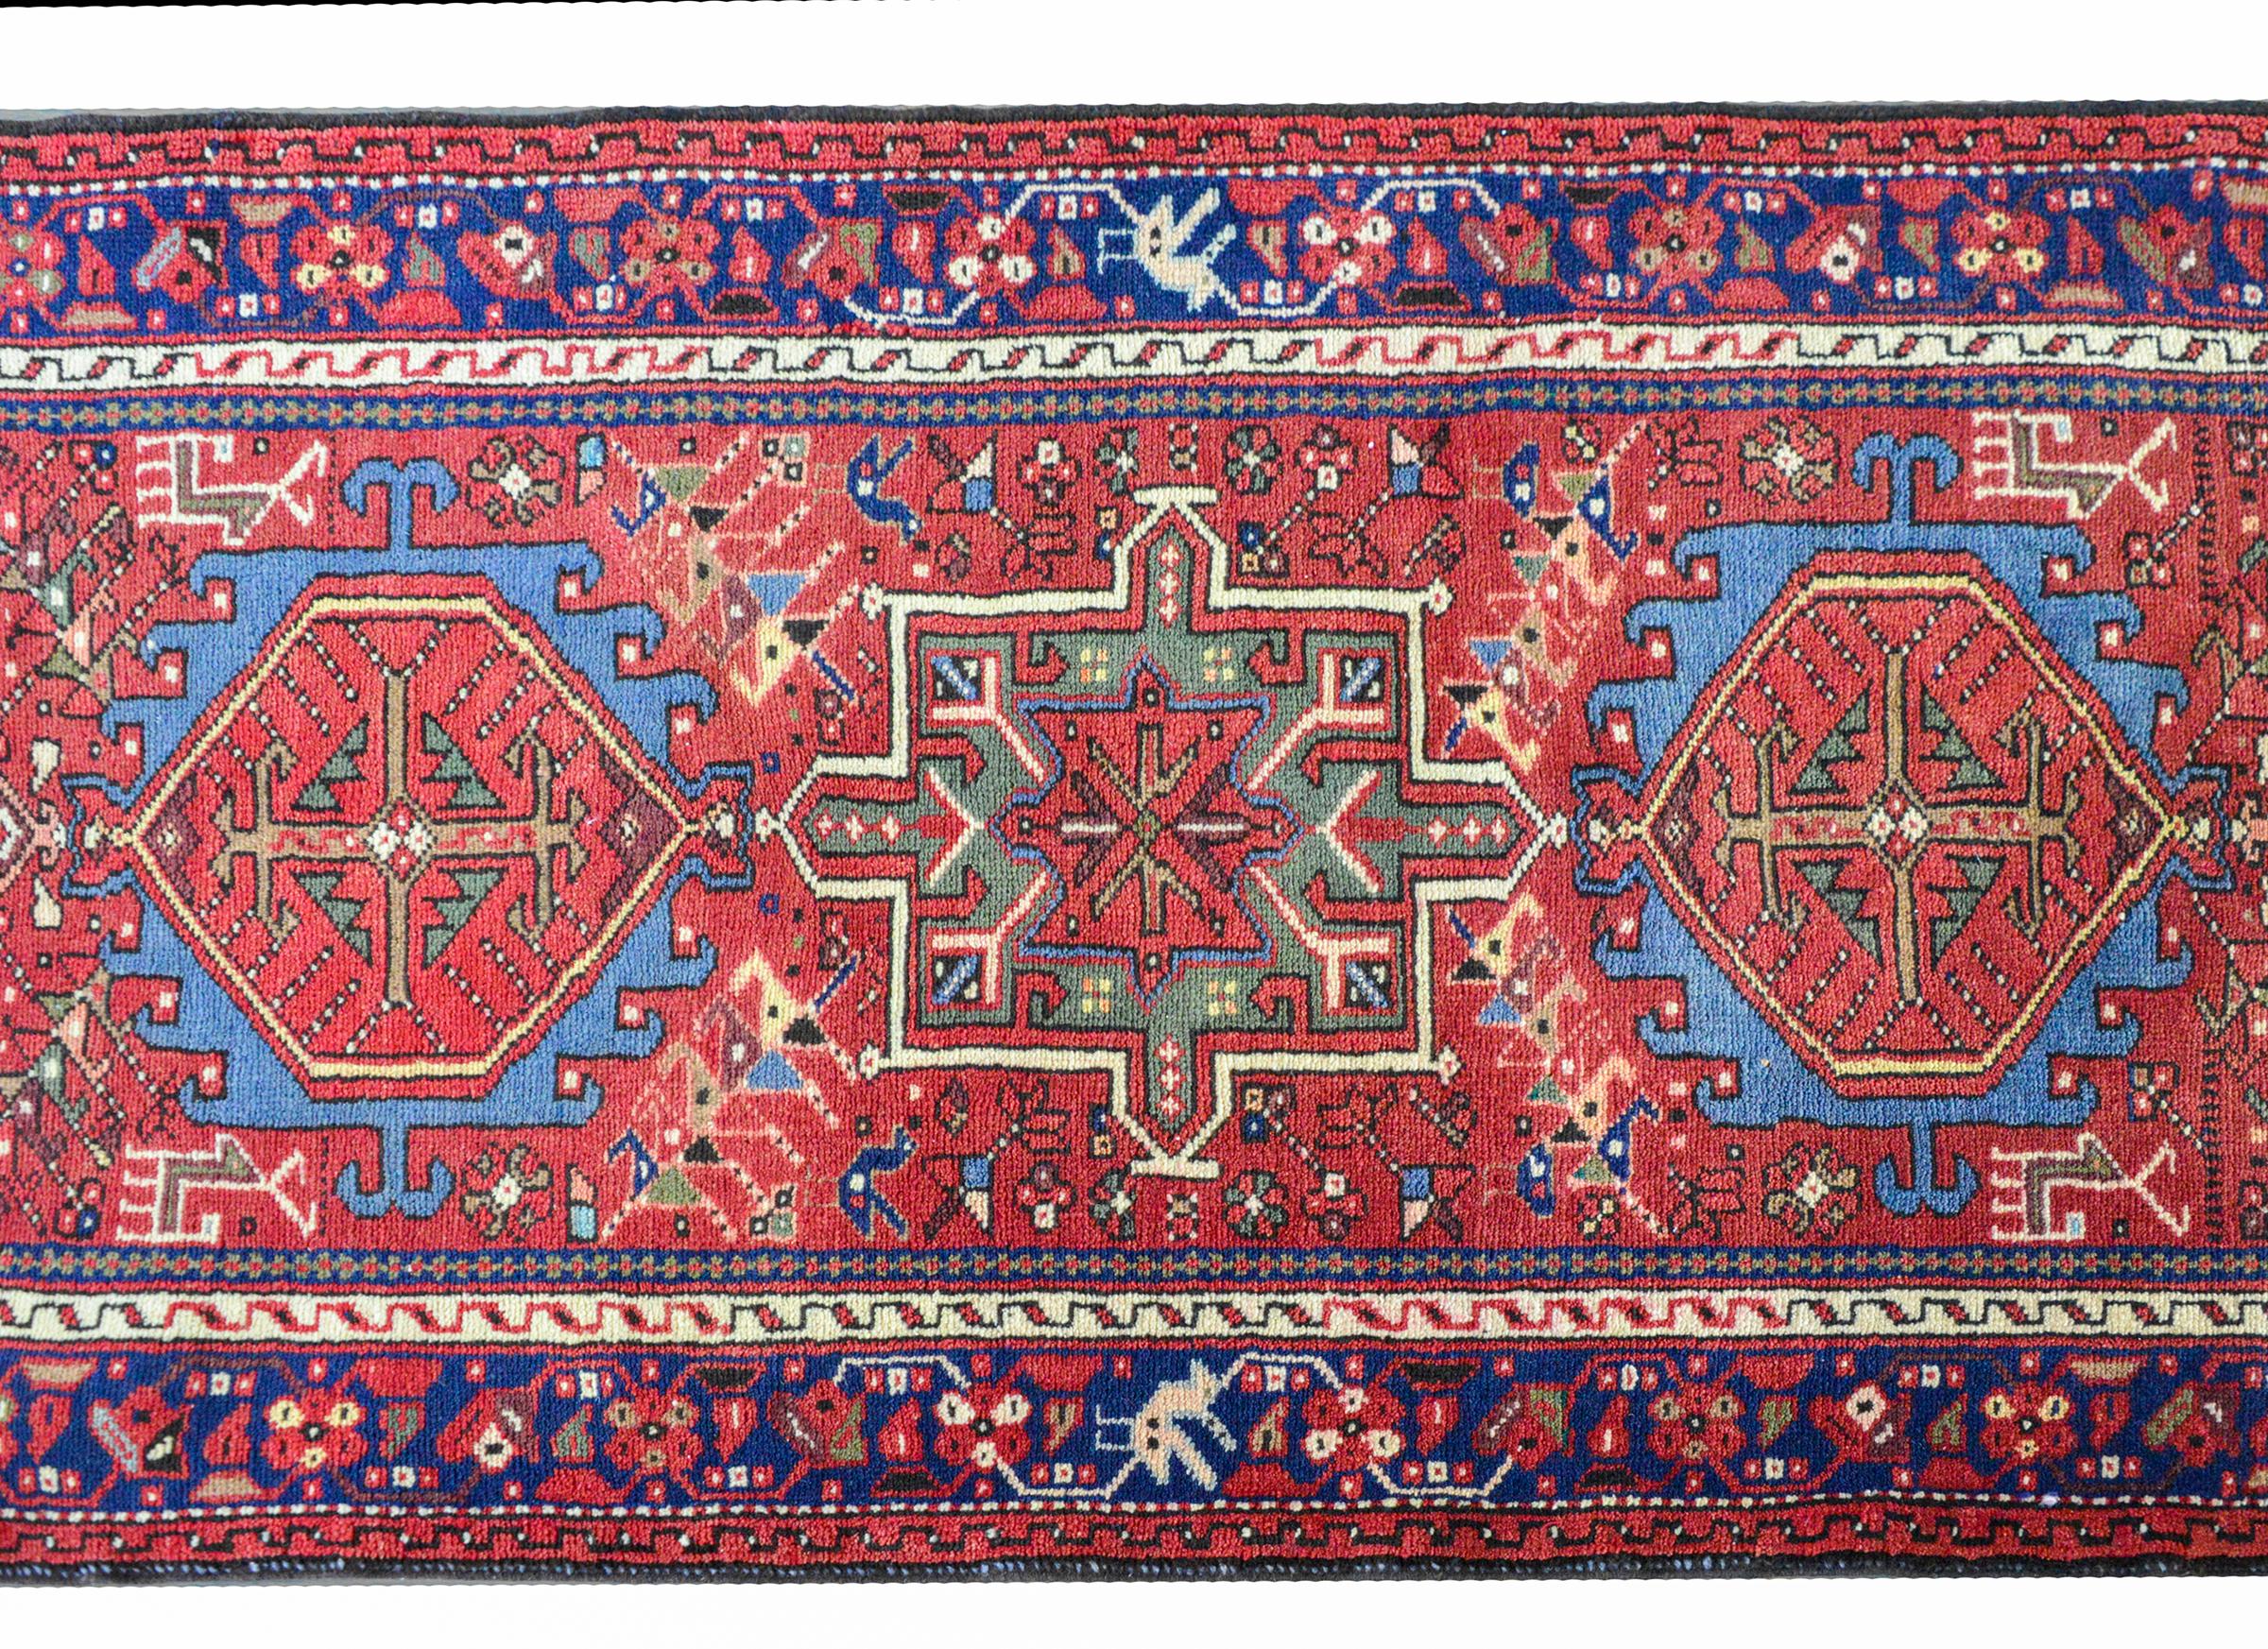 A wonderful mid-20th century Persian Karadja runner with several stylized floral medallions woven in myriad colors including indigo, pink, white, crimson, and green, amidst a field of more stylized flowers against a crimson background. The border is